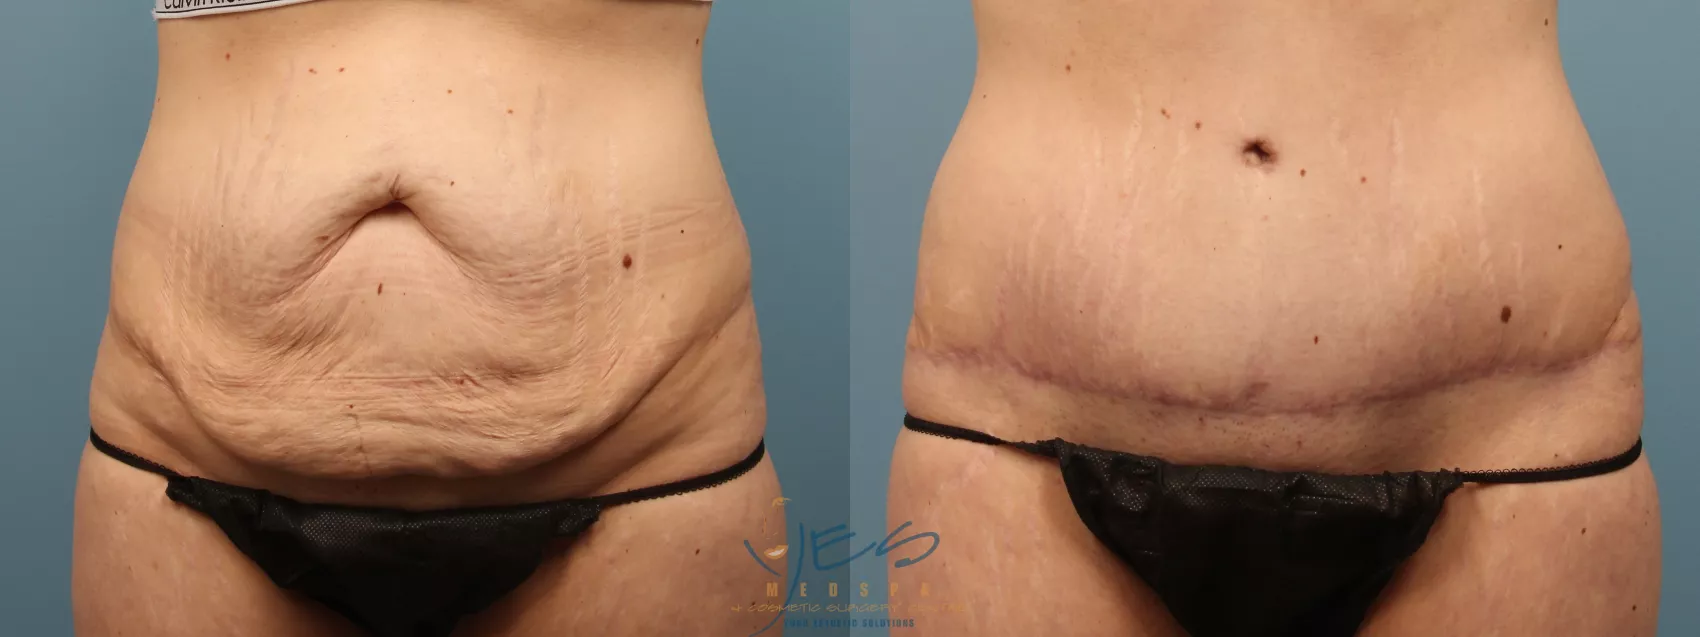 Tummy Tuck Before & After Photos Patient 186, Vancouver, BC